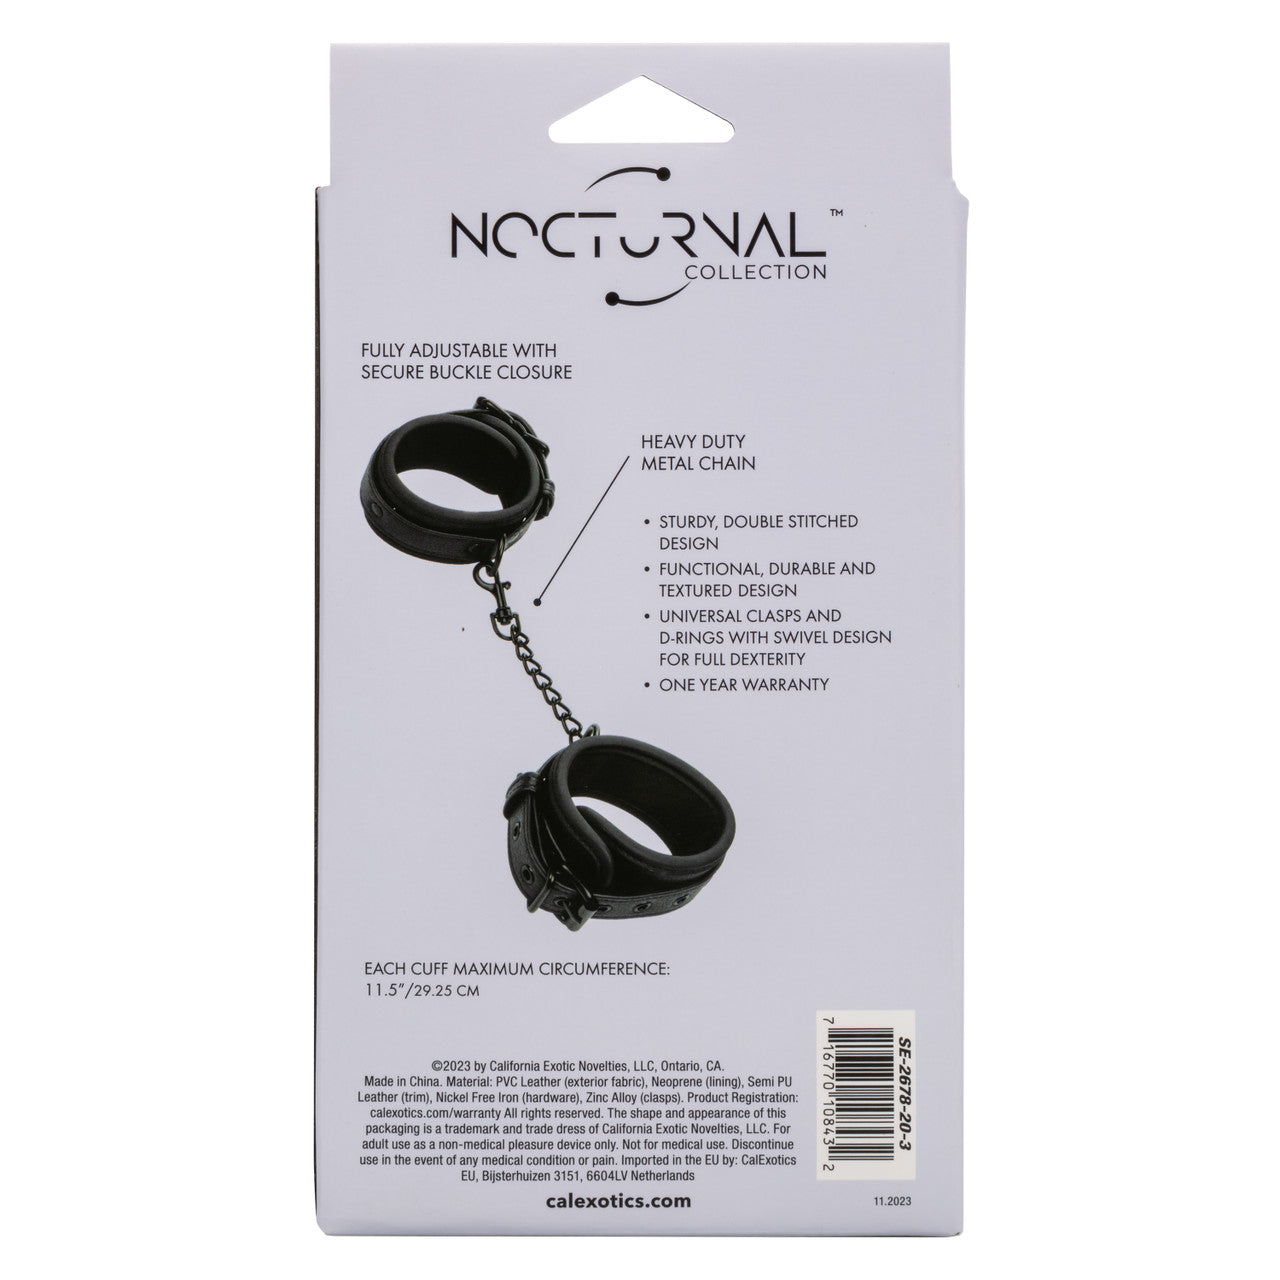 CalExotics Nocturnal Collection Ankle Cuffs